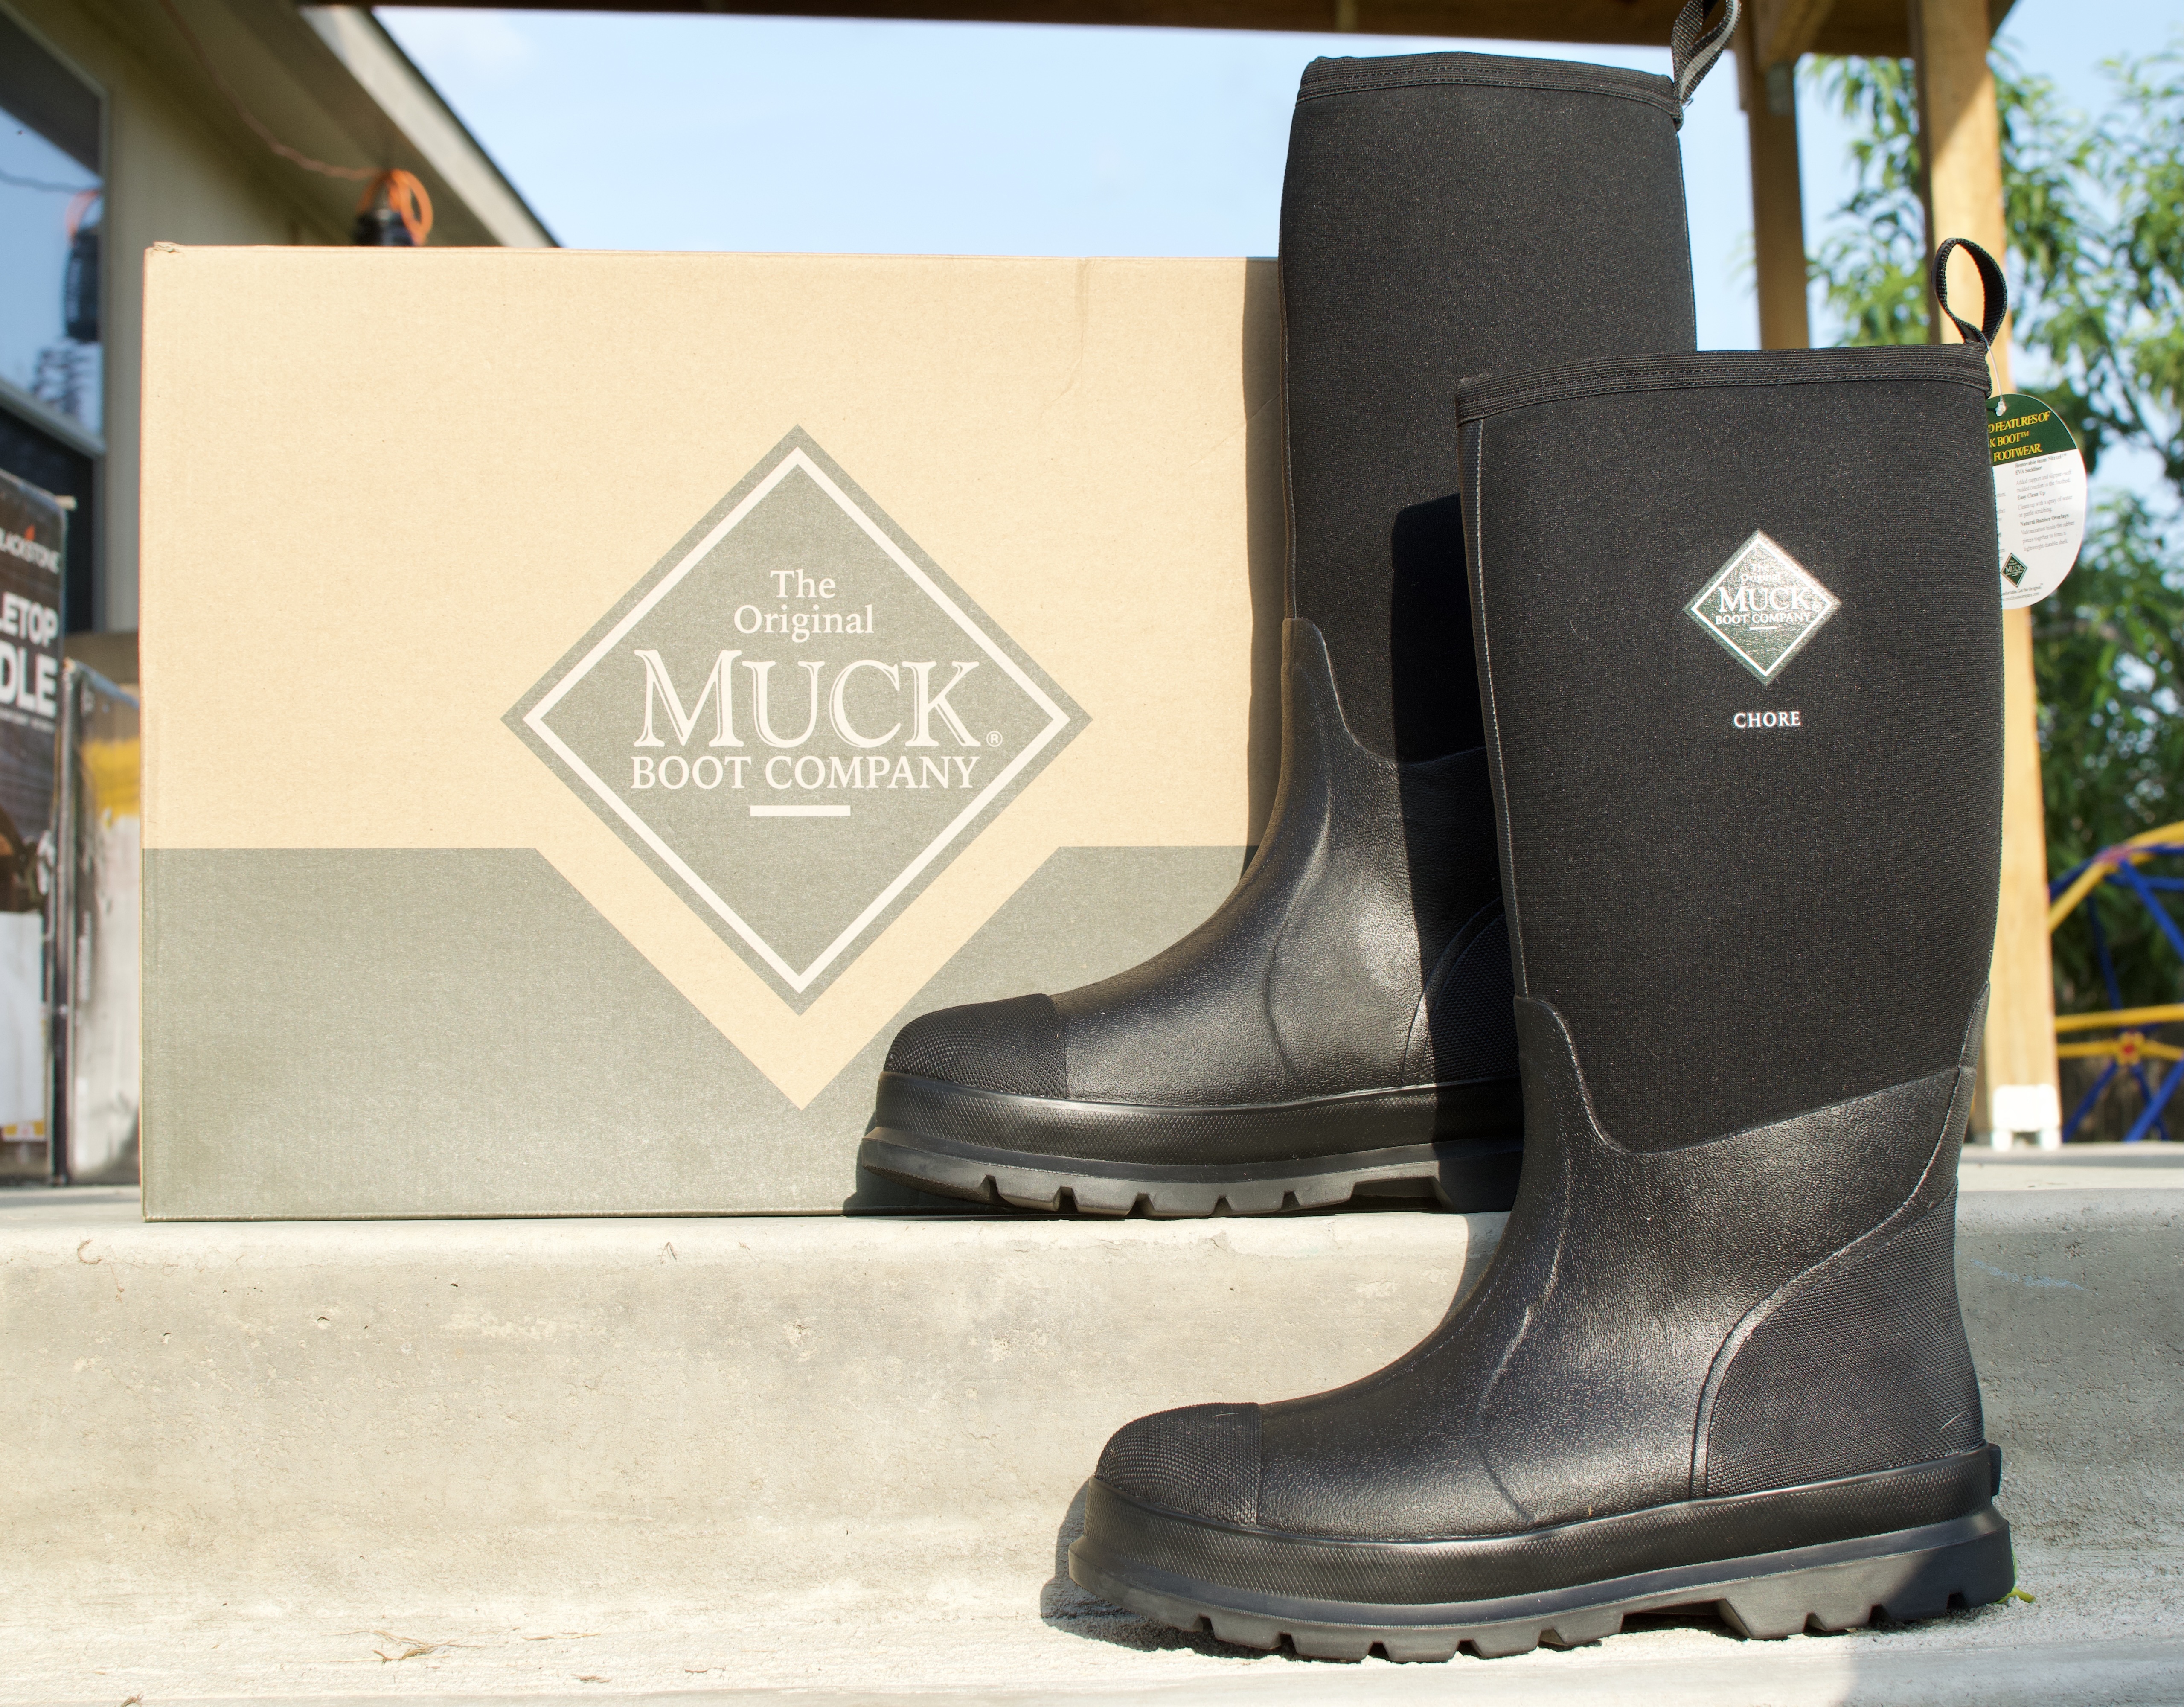 Muck Boots Men's Chore Max Hi Composite Toe Rubber Work Boots, Father's Day, Gifts for Dad, Dick's Sporting Goods